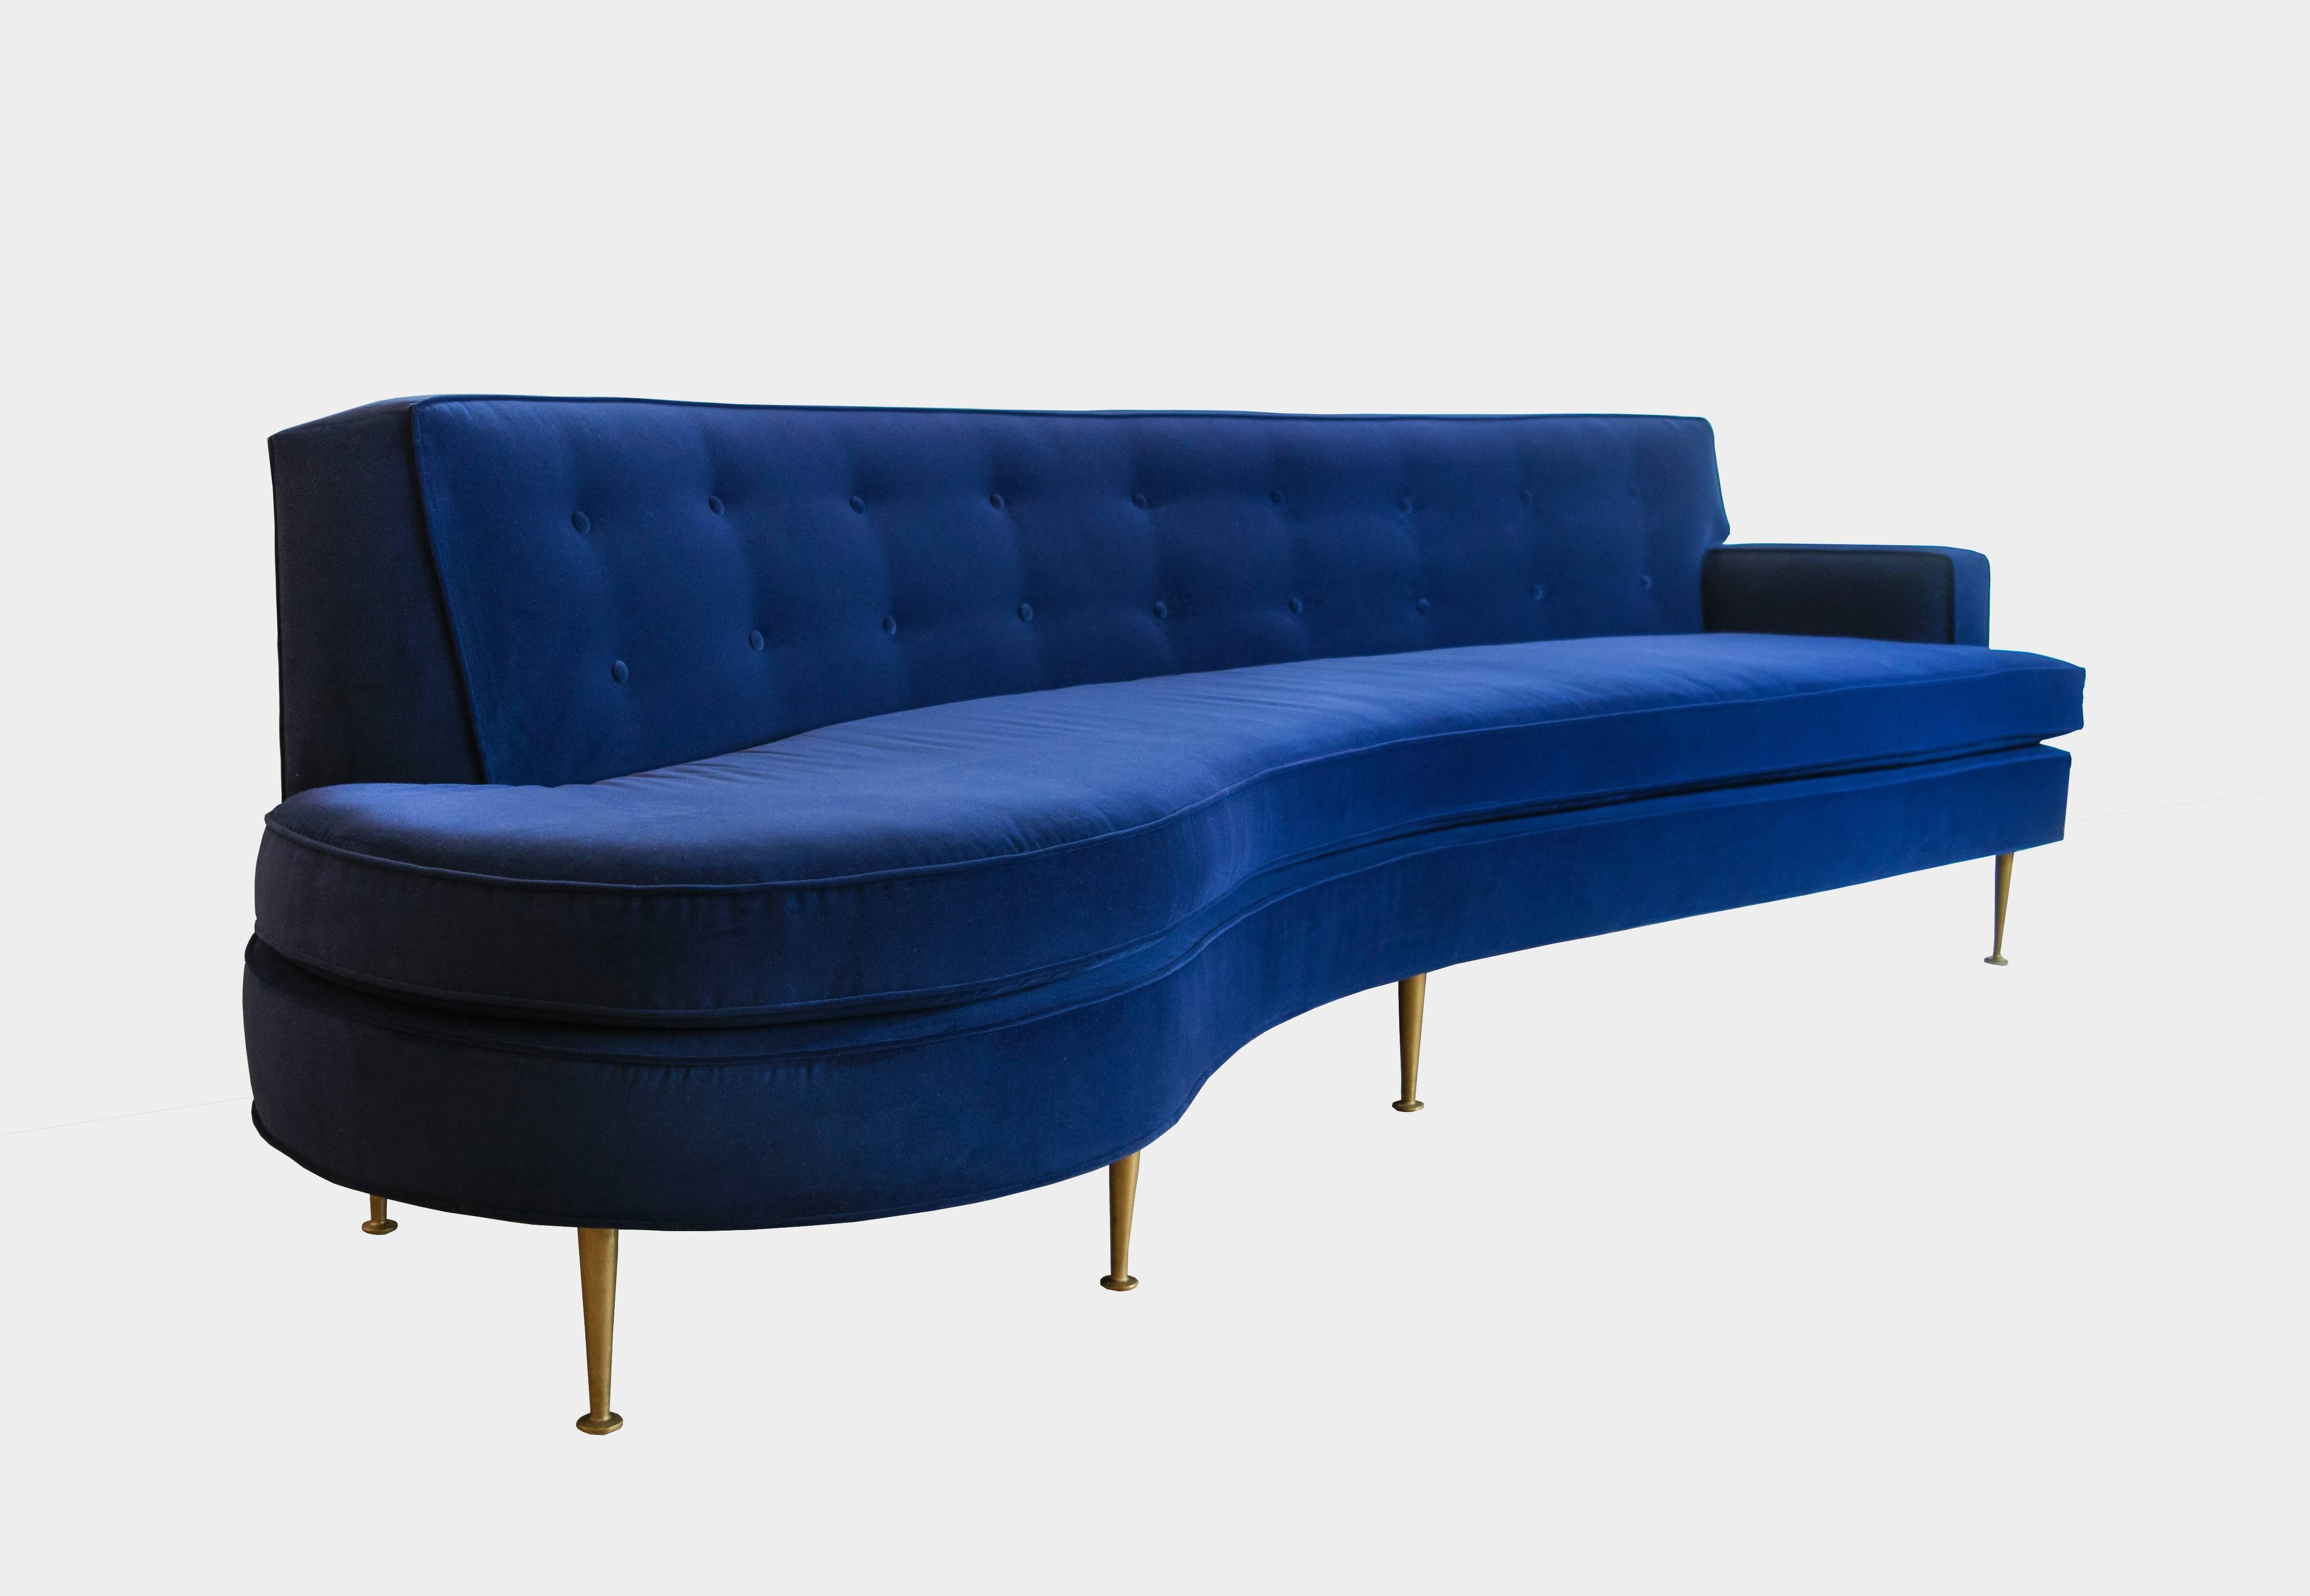 We don't know who designed this exceptional sophisticated and stylish sofa from the 1950s; the original tag said Allen Furniture. One end of the sofa is open armed, similar to Vladimir Kagan but also characteristic of Harvey Probber. It has been